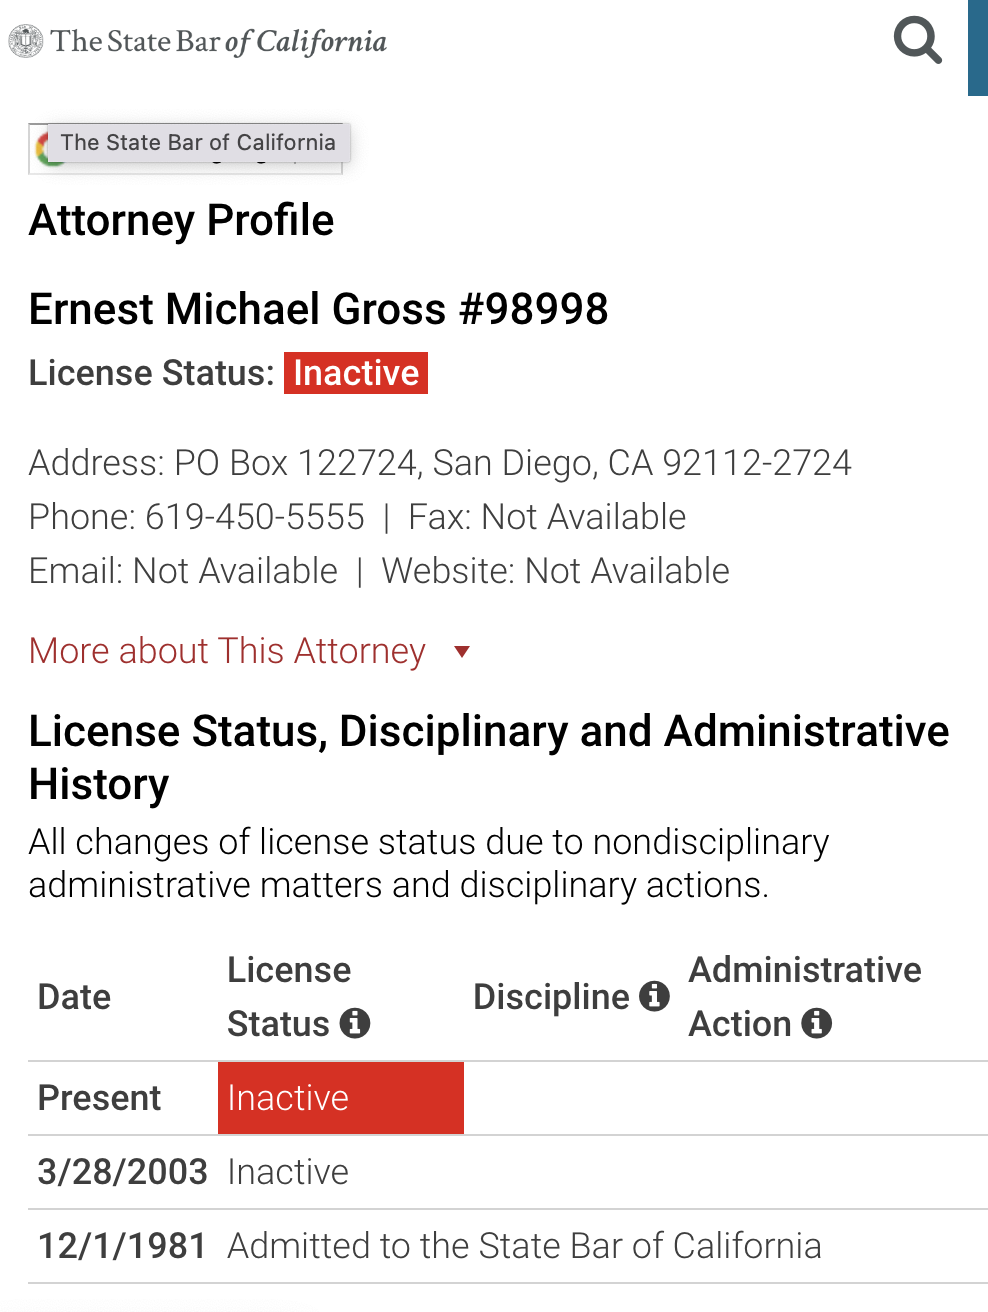 Ernest Michael Gross #98998 License Status: Admitted to the State Bar of California, Present Inactive  Case Number 23-O-22905